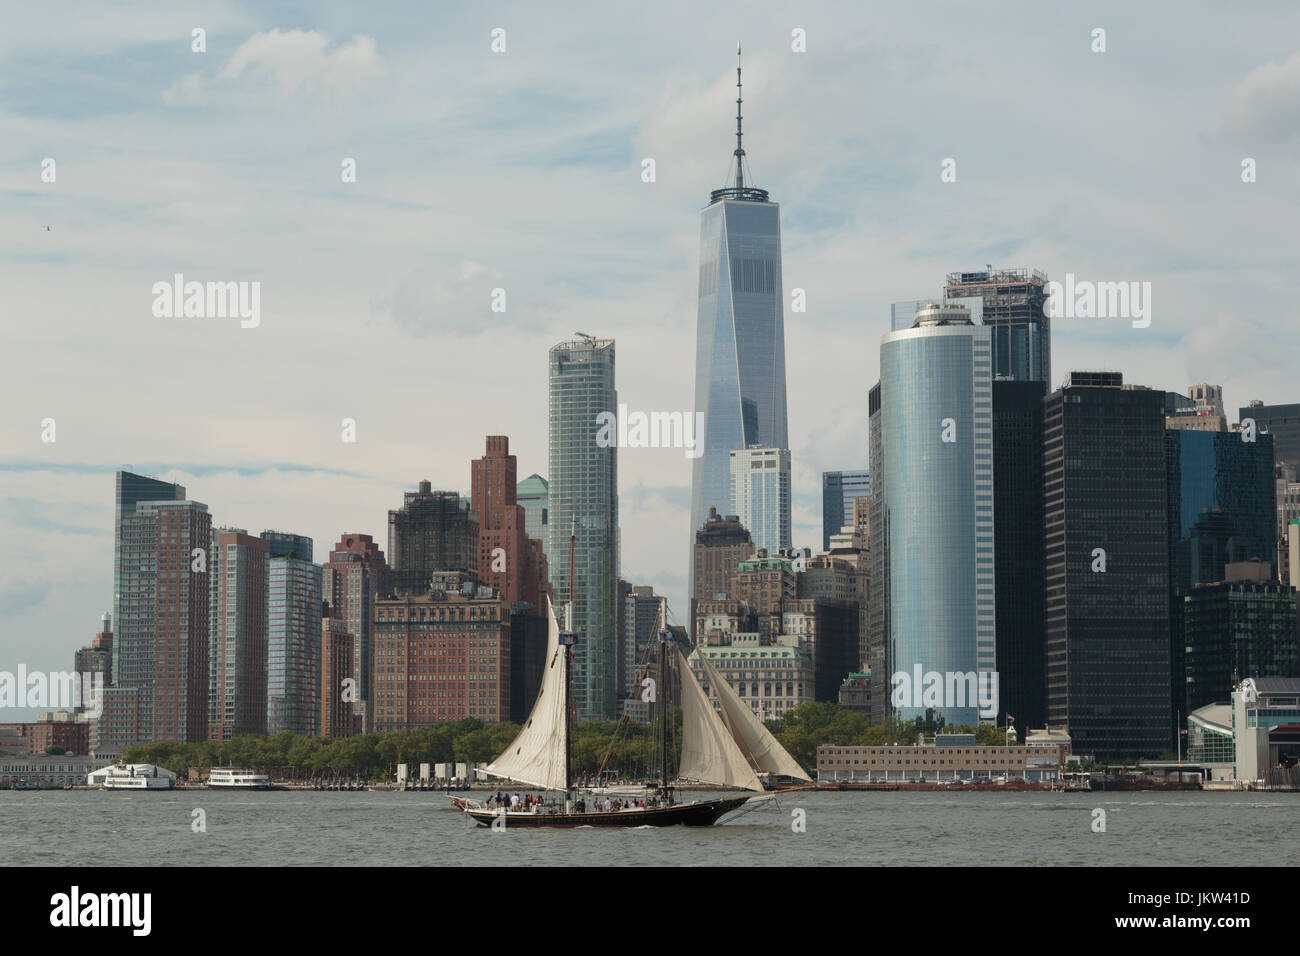 A photograph of an old sailing ship sailing past the Manhattan skyline, as seen from Governor's Island, New York City. Stock Photo